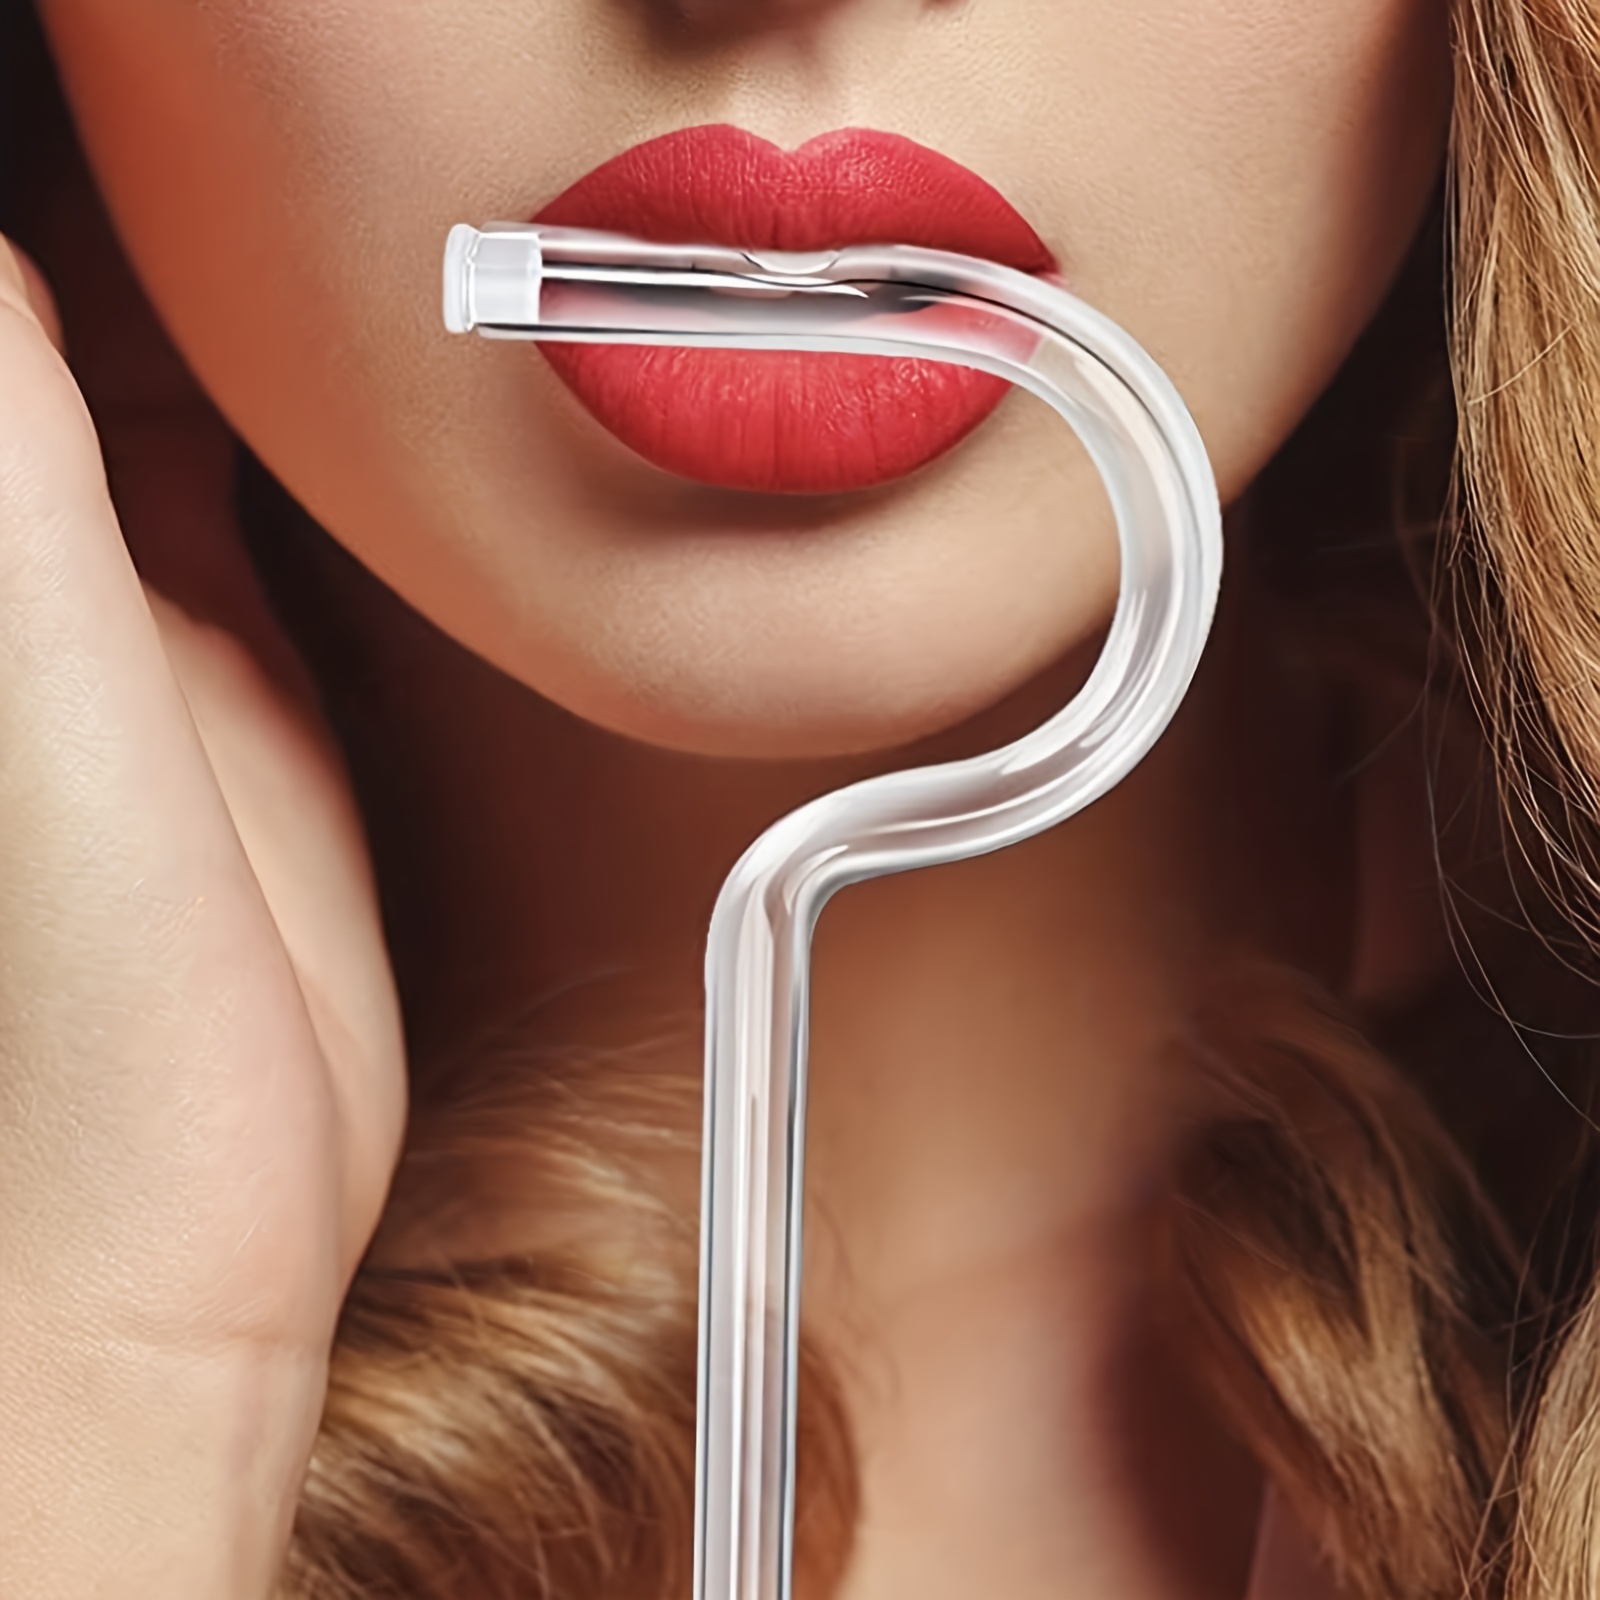 Anti Wrinkle Straw, Anti Wrinkle Reusable Glass Drinking Straw, Anti-Aging  Straw, Flute Style Design For Engaging Lips Horizontally